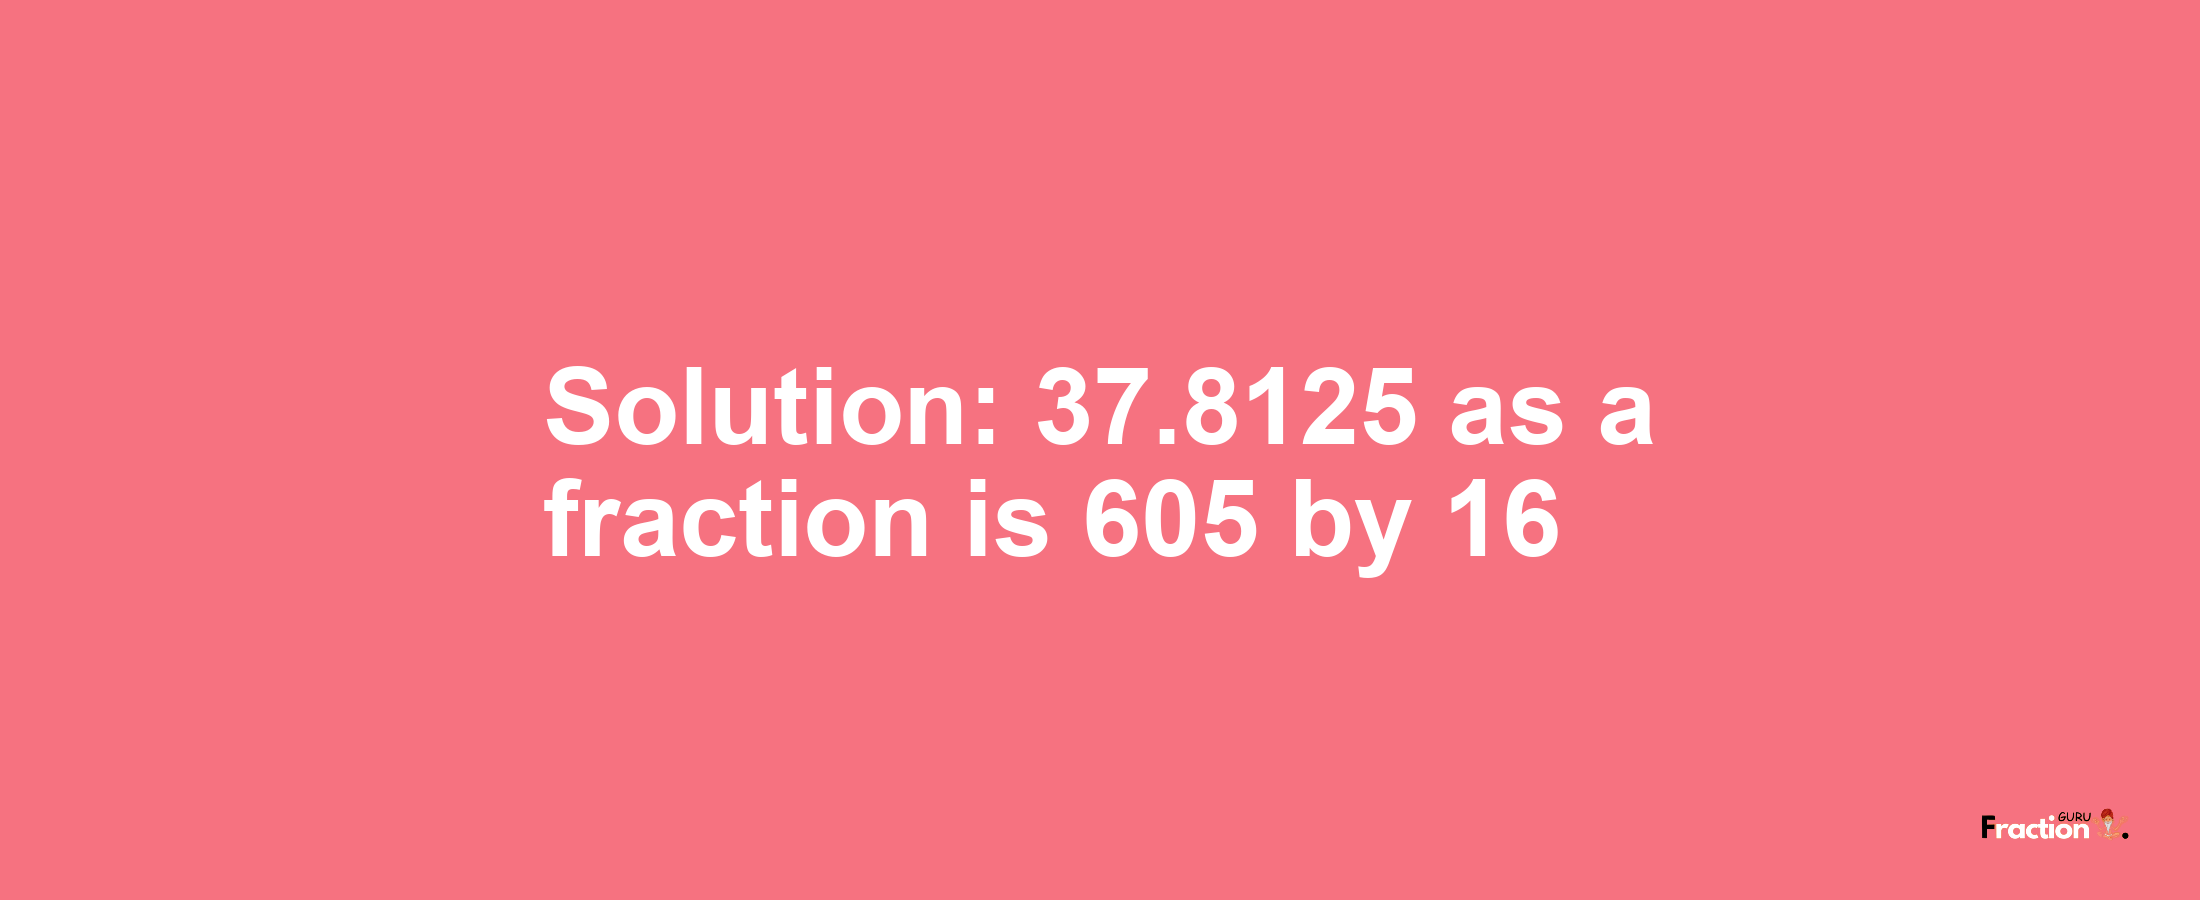 Solution:37.8125 as a fraction is 605/16